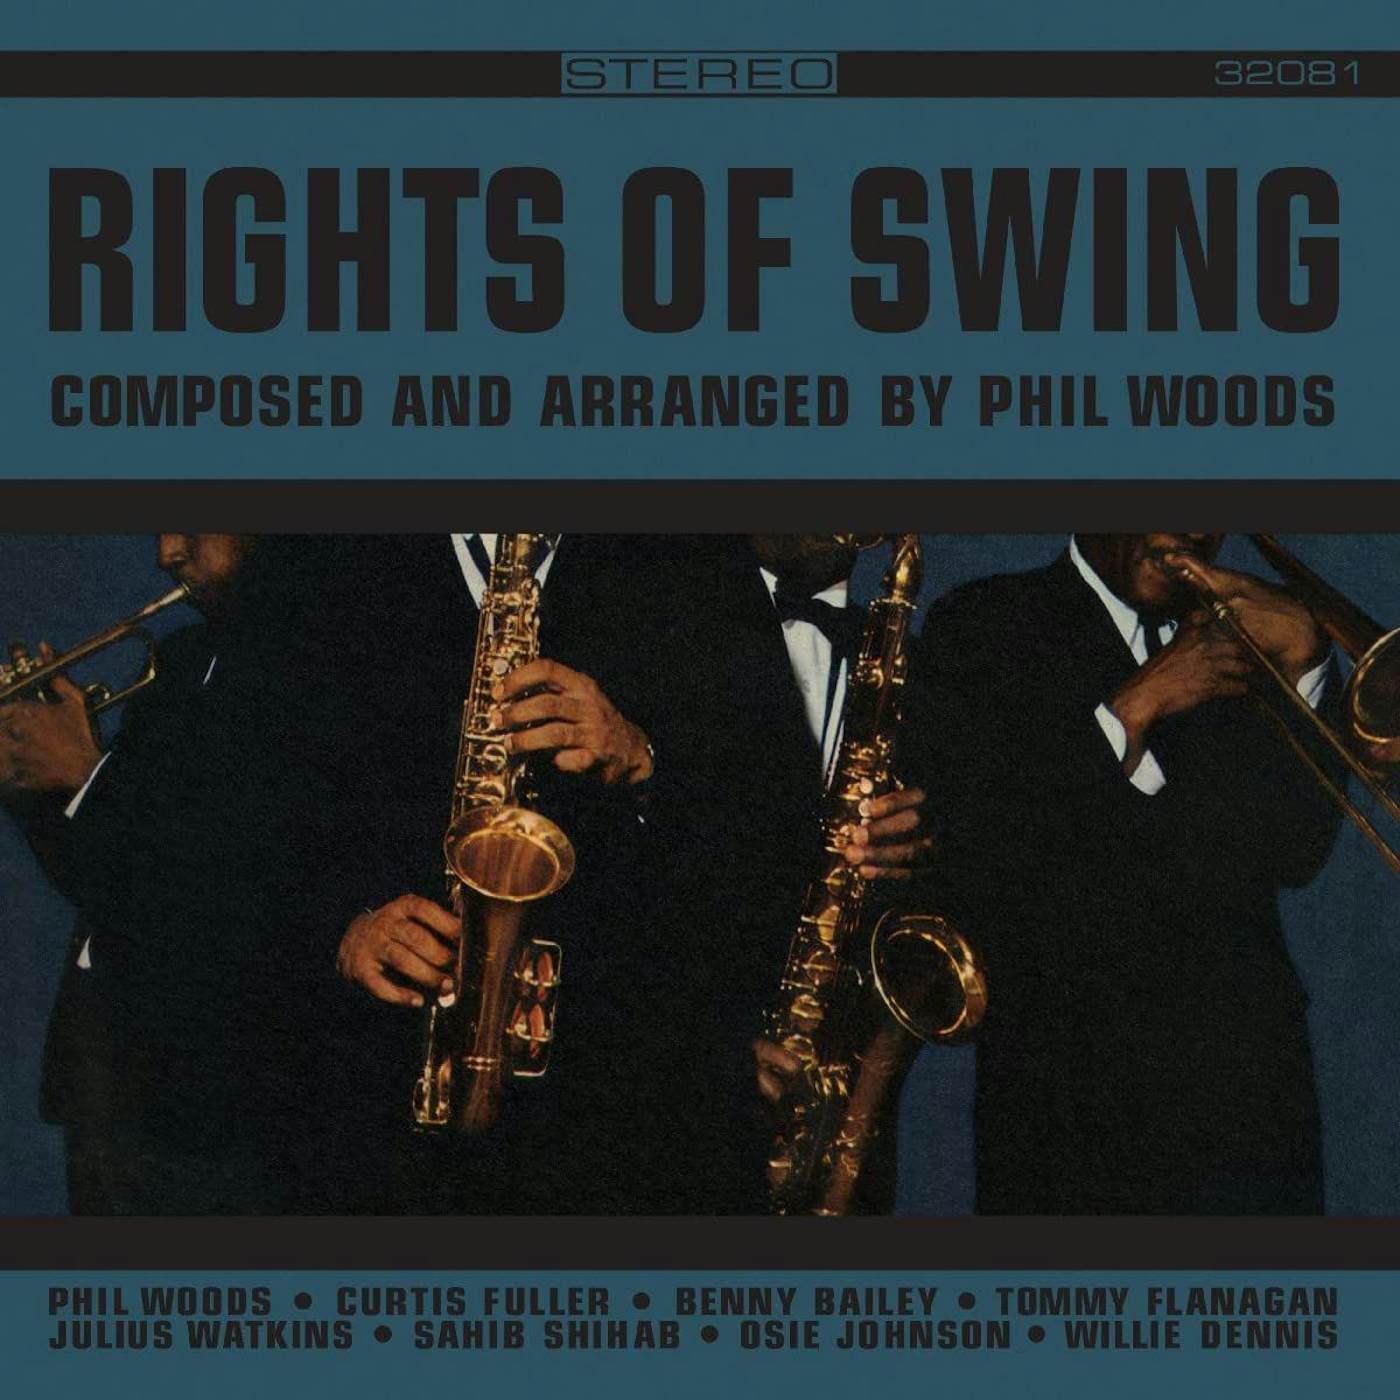 Phil Woods Rights Of Swing (Remastered) (180G) Vinyl Record